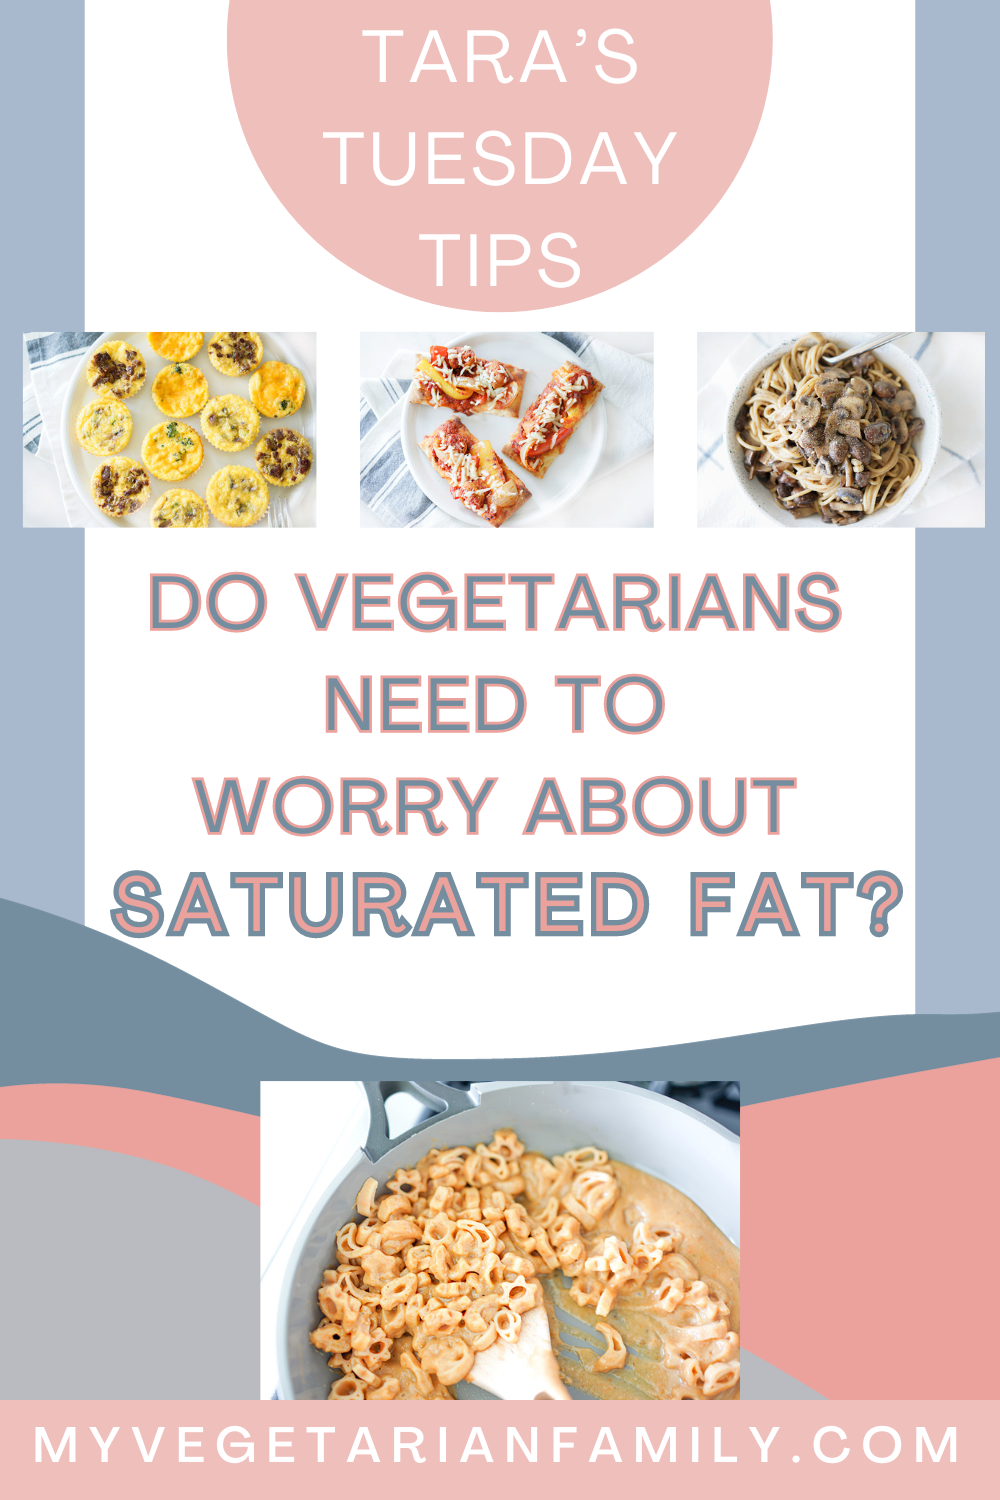 Do Vegetarians Need to Worry About Saturated Fat? | Tara's Tuesday Tips | My Vegetarian Family #saturatedfat #plantbasedsaturatedfats